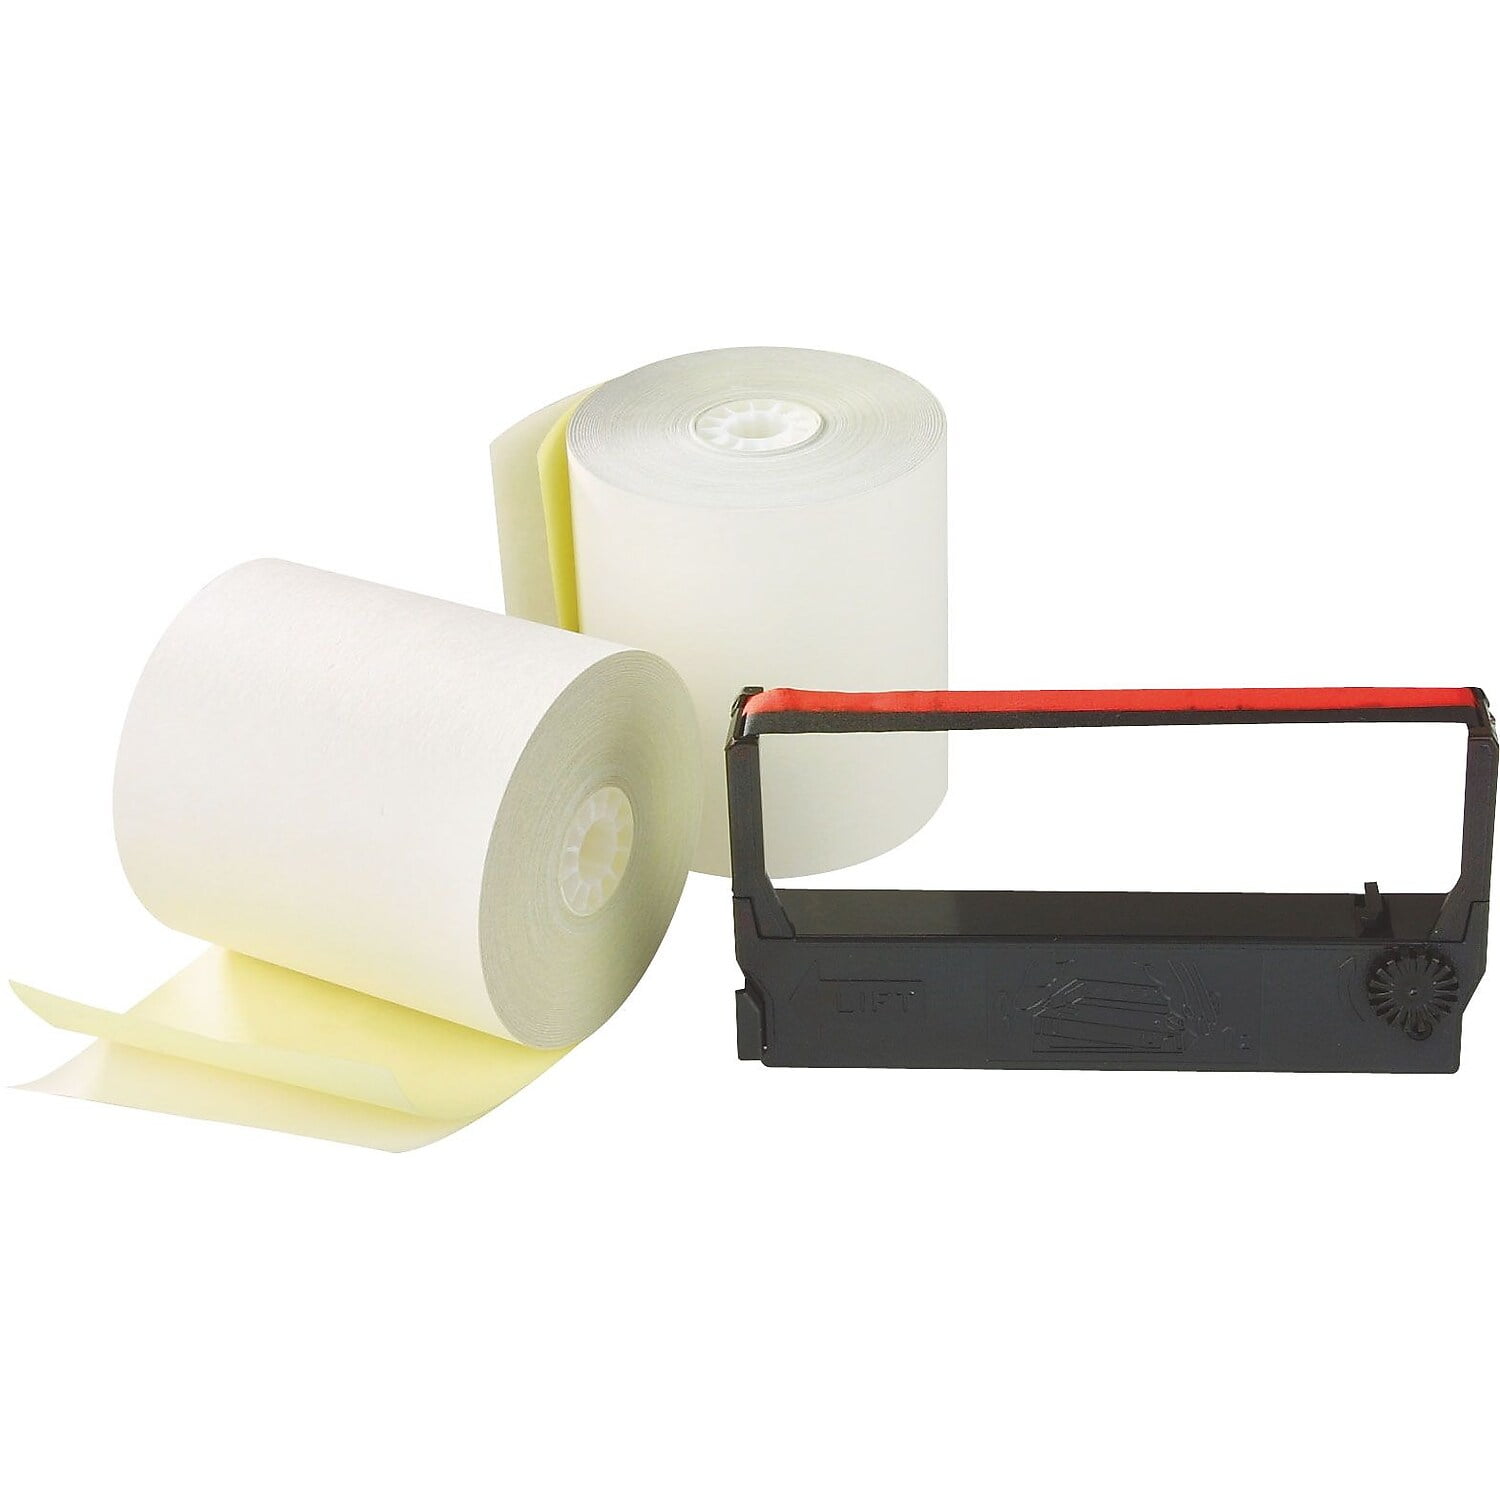 Staples Credit Card Paper Roll for Verifone 250-300